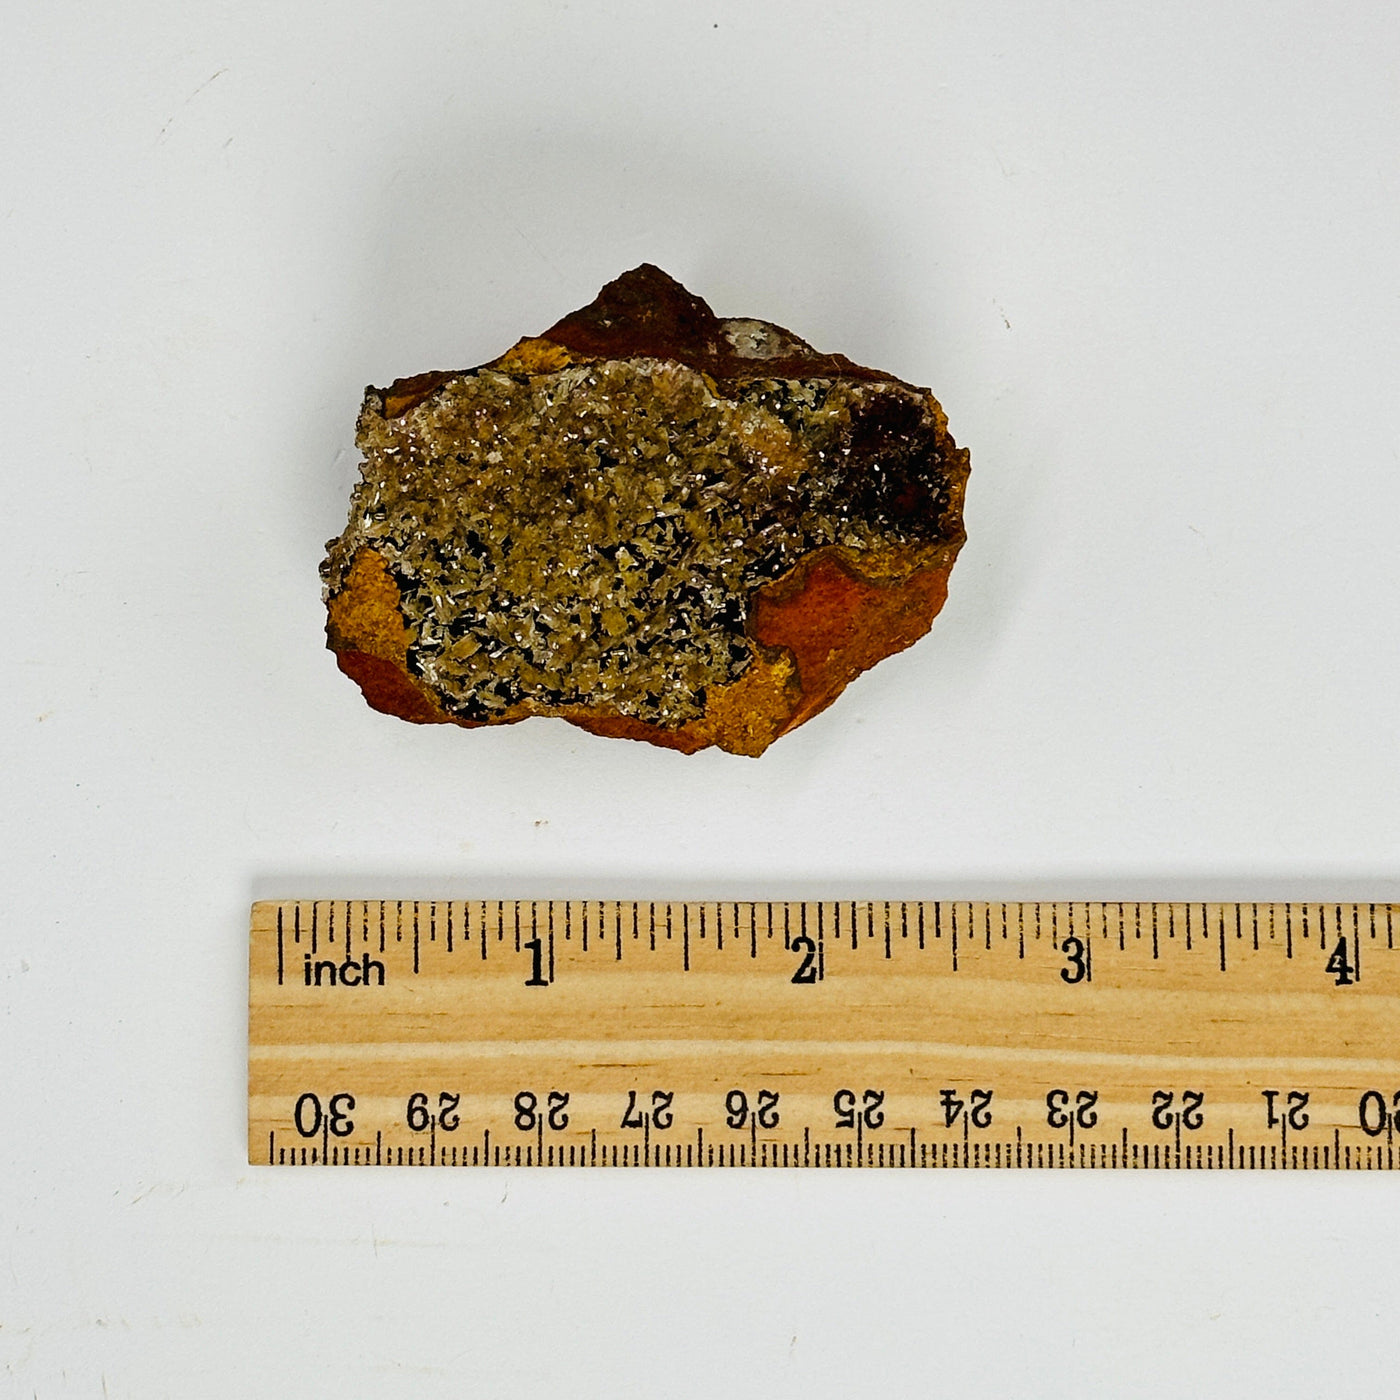 hemimorphite formation next to a ruler for size reference